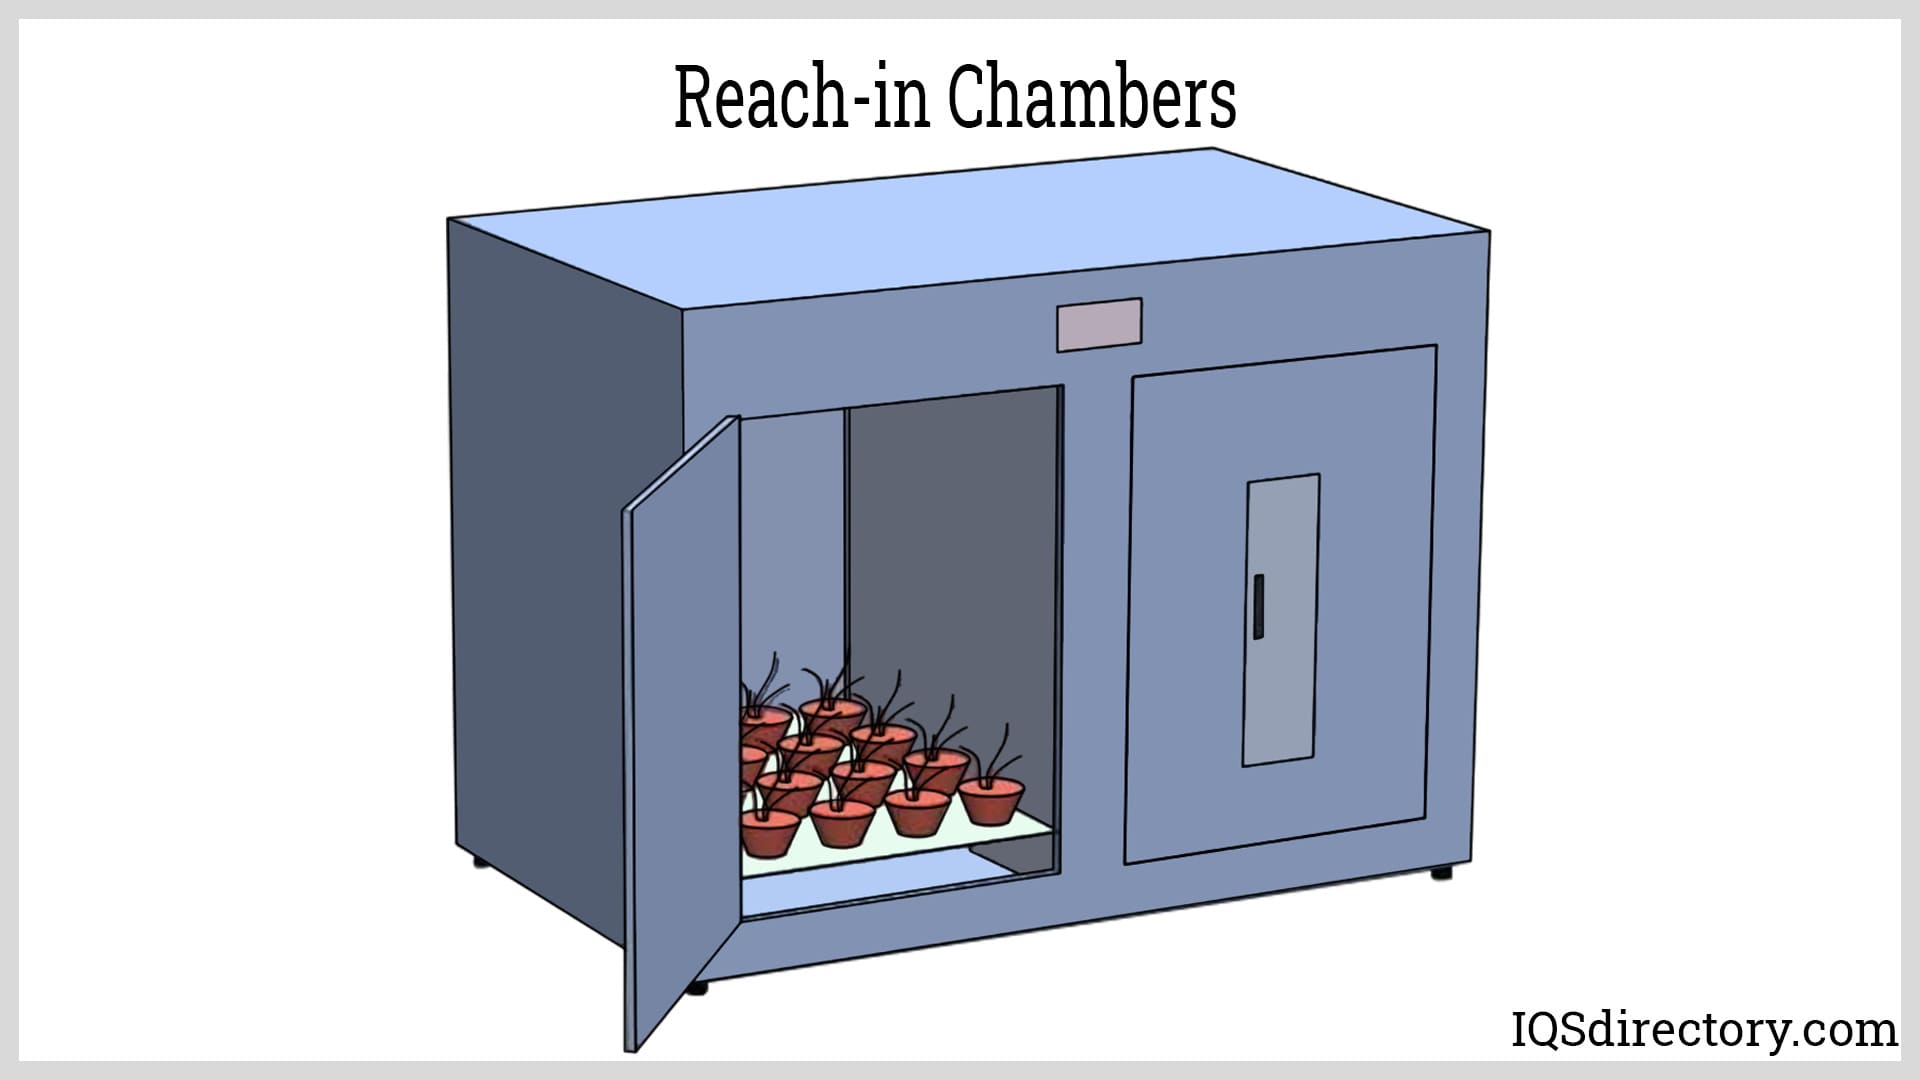 Reach-in Chambers